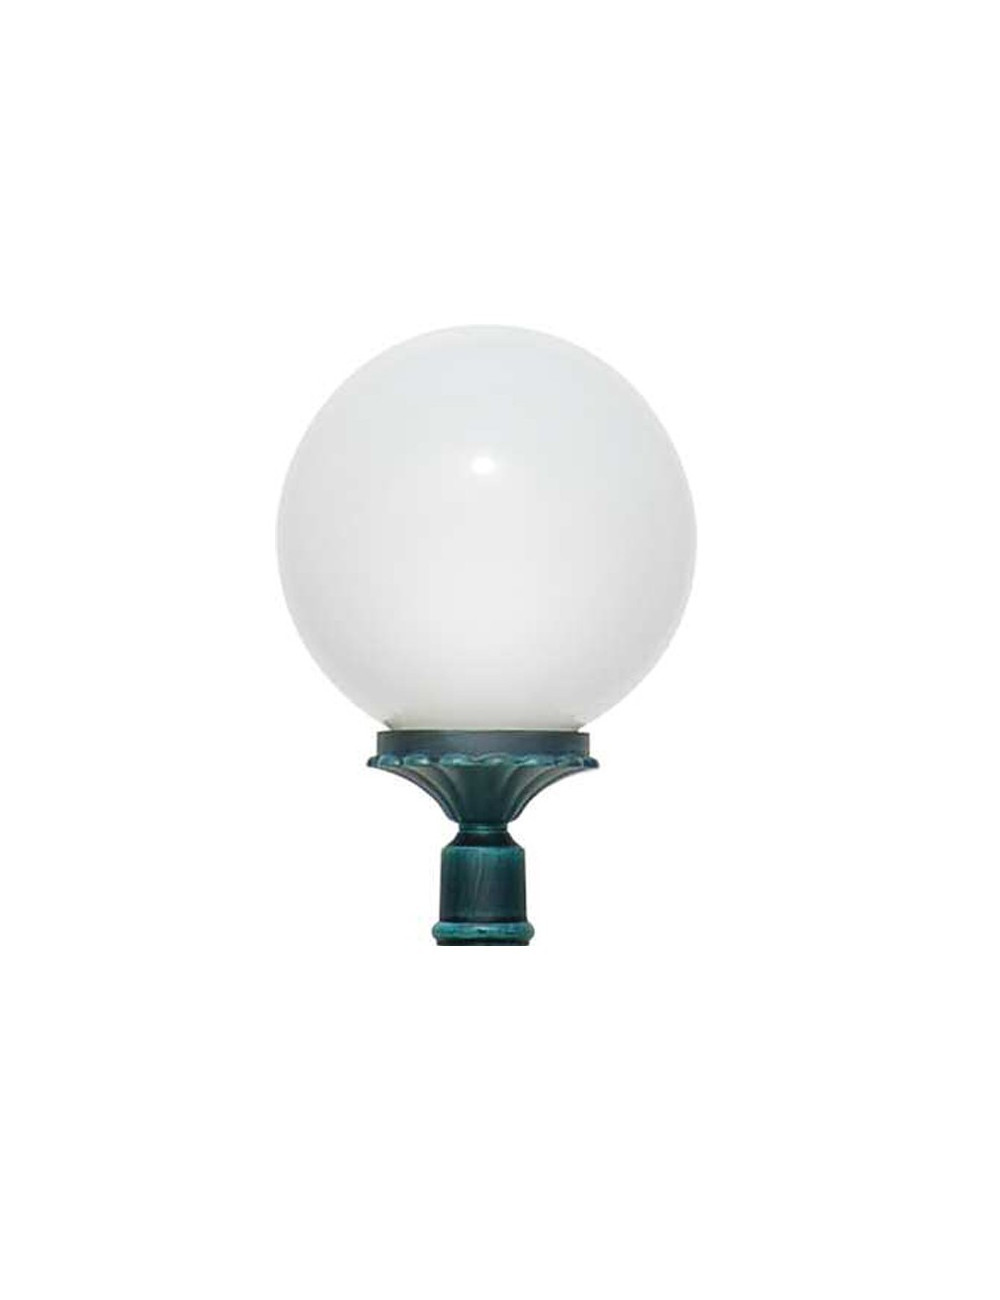 ORIONE Lantern with attachment for Existing Pole Globe Sphere d.25 Outdoor Garden